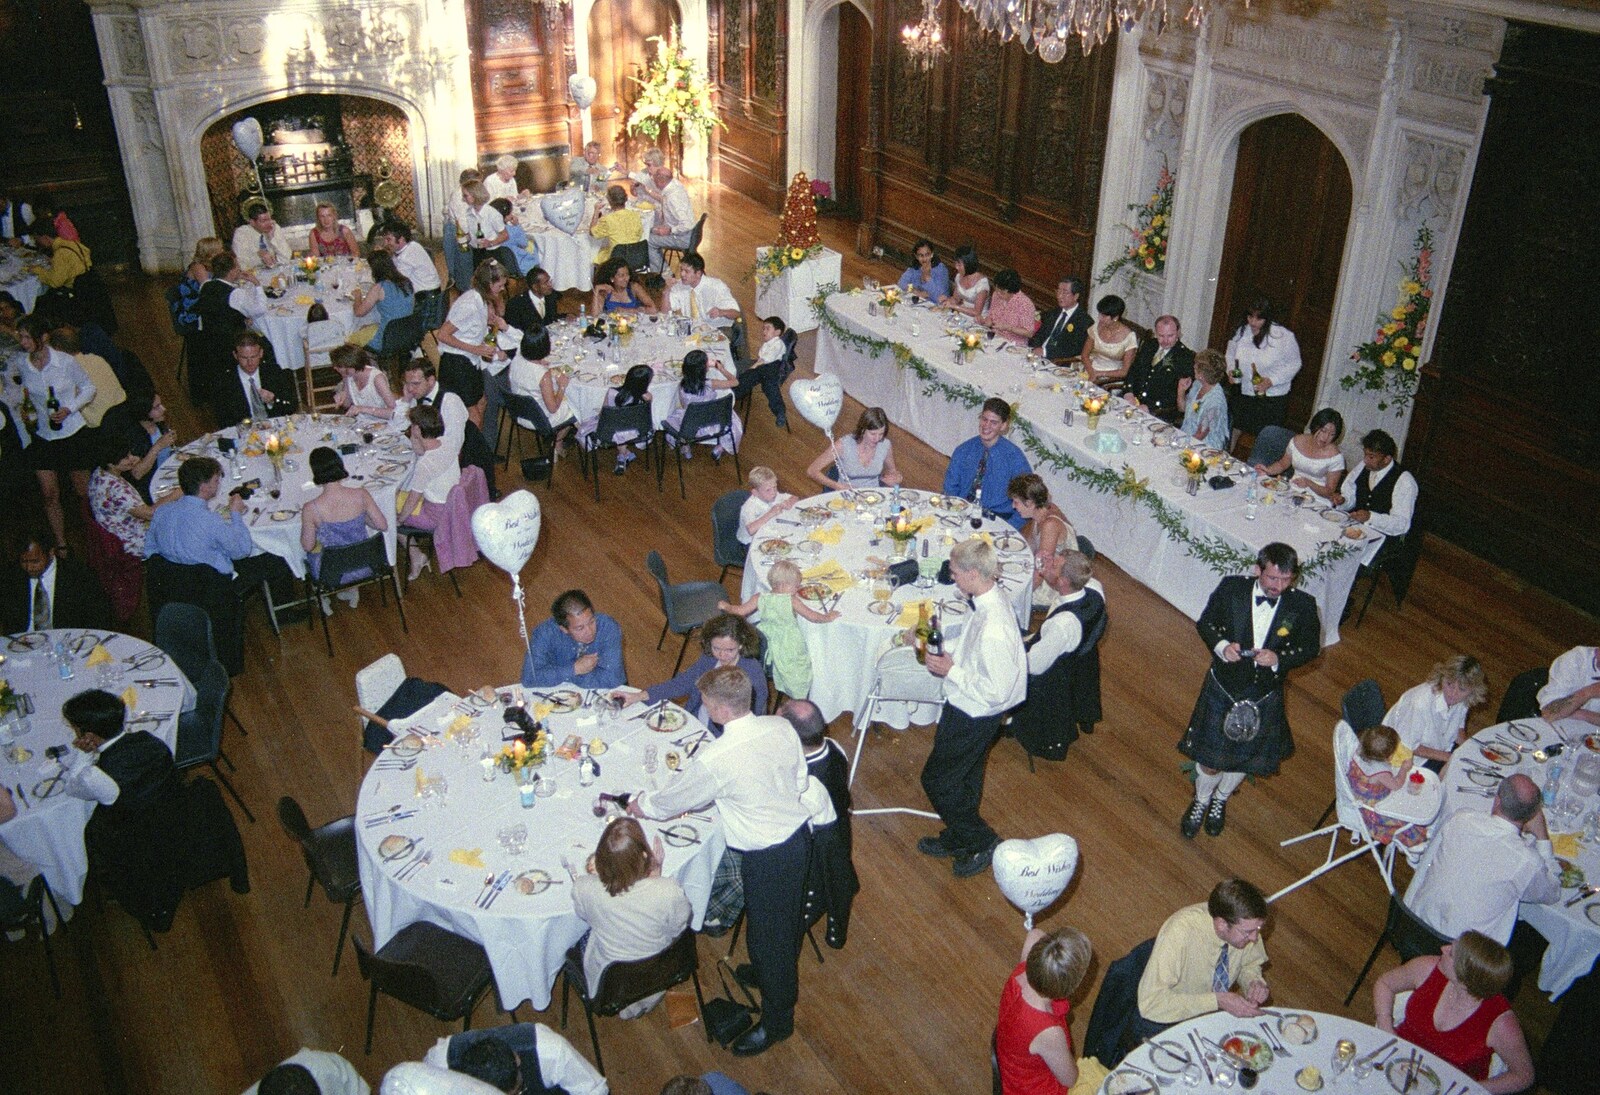 Hamish and Jane's Wedding, Canford School, Wimborne, Dorset - 5th August 1998: A view of the dining room